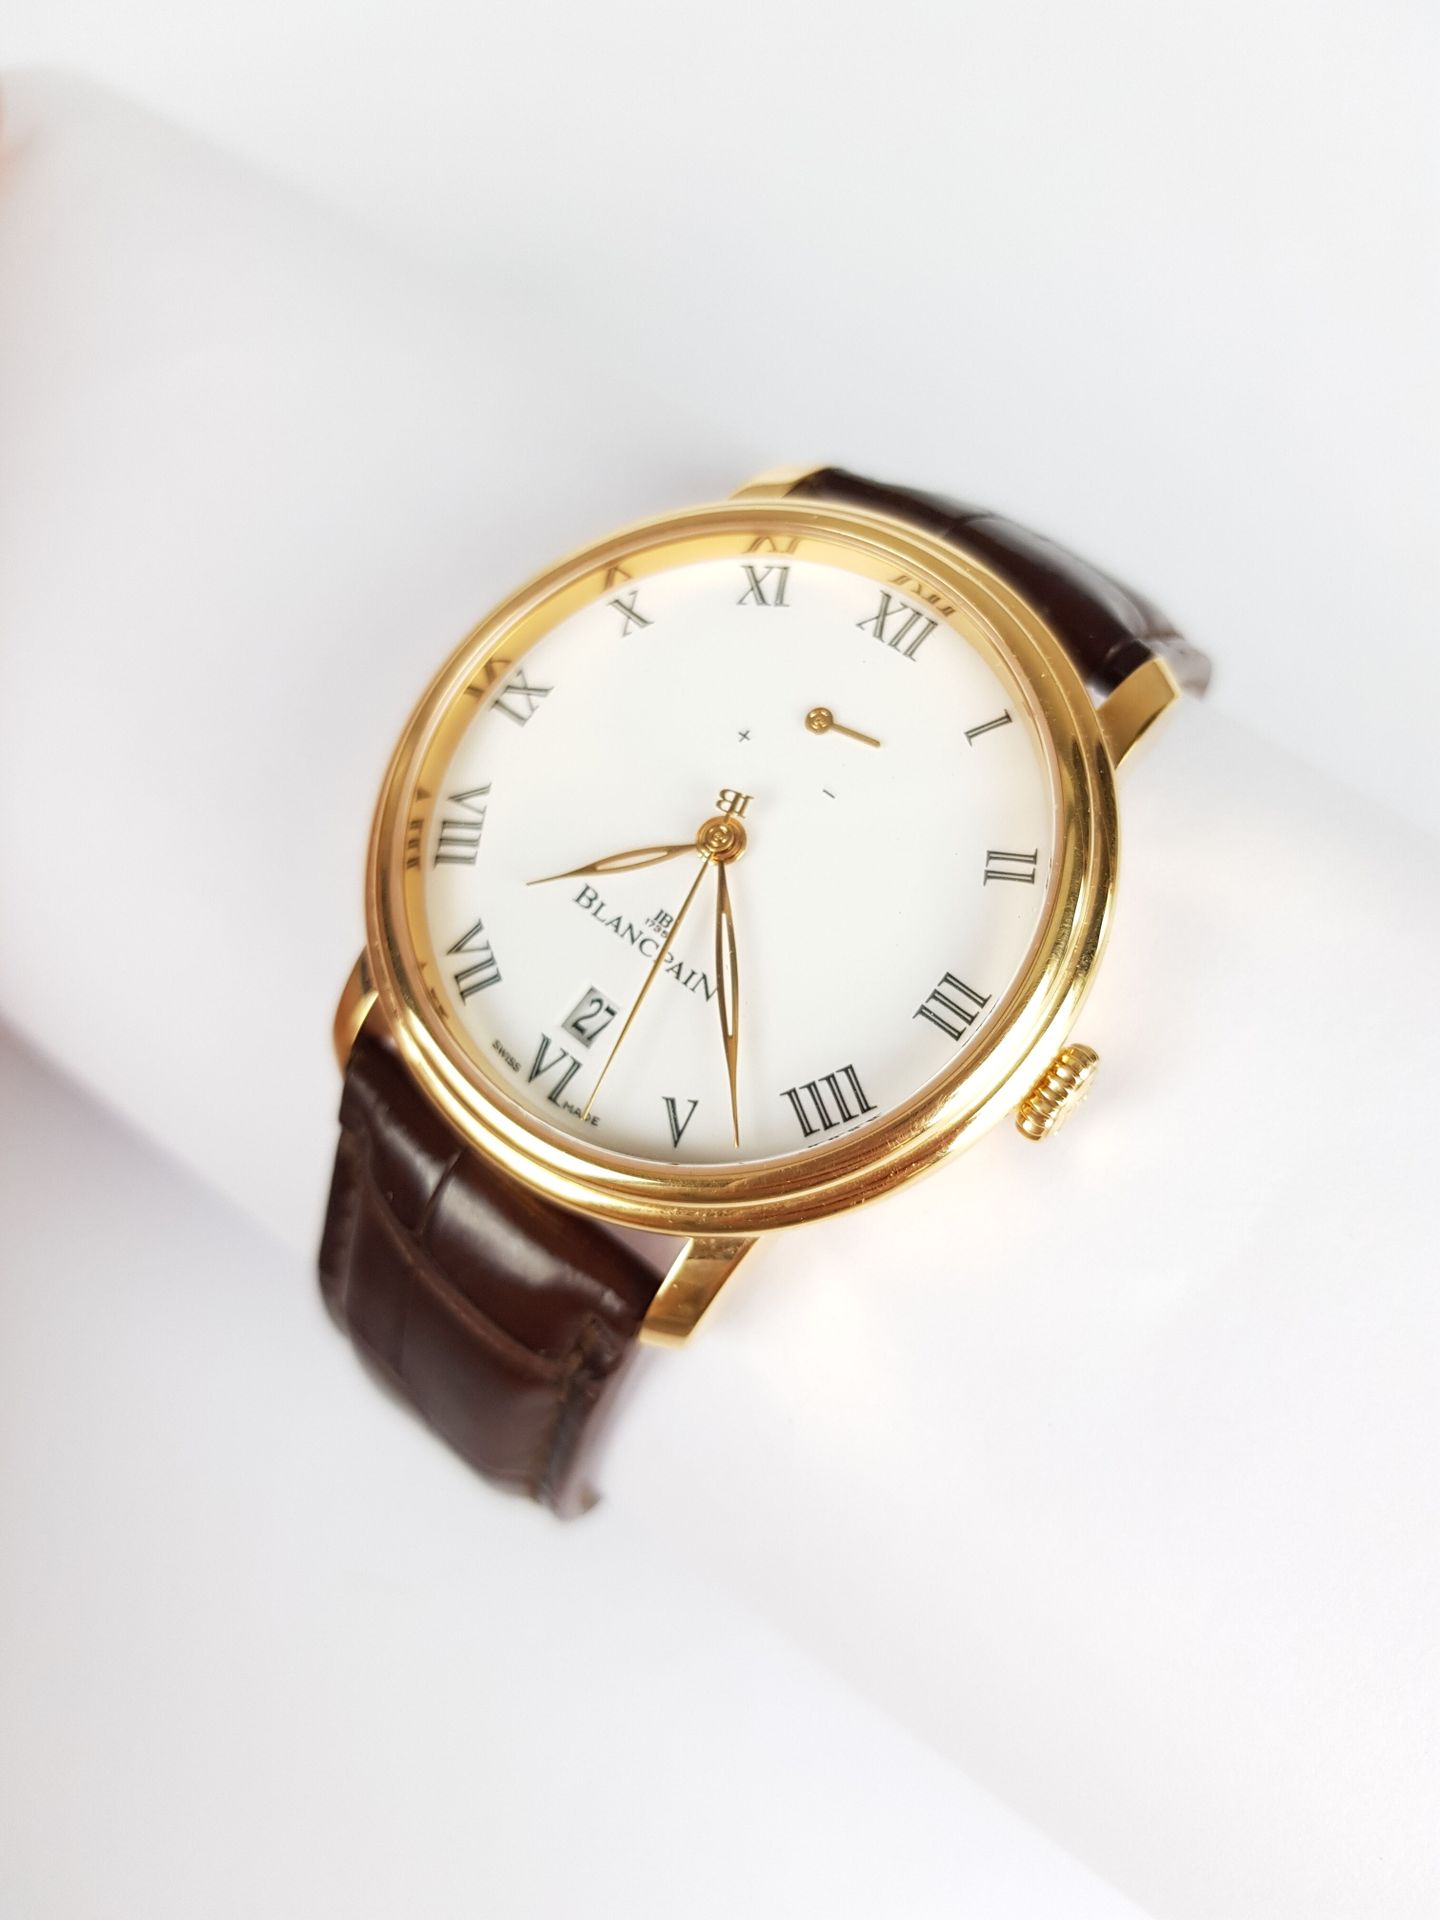 Null Starting price : 2 500 €.

BLANCPAIN

Villeret Limited Edition

Watch in pi&hellip;